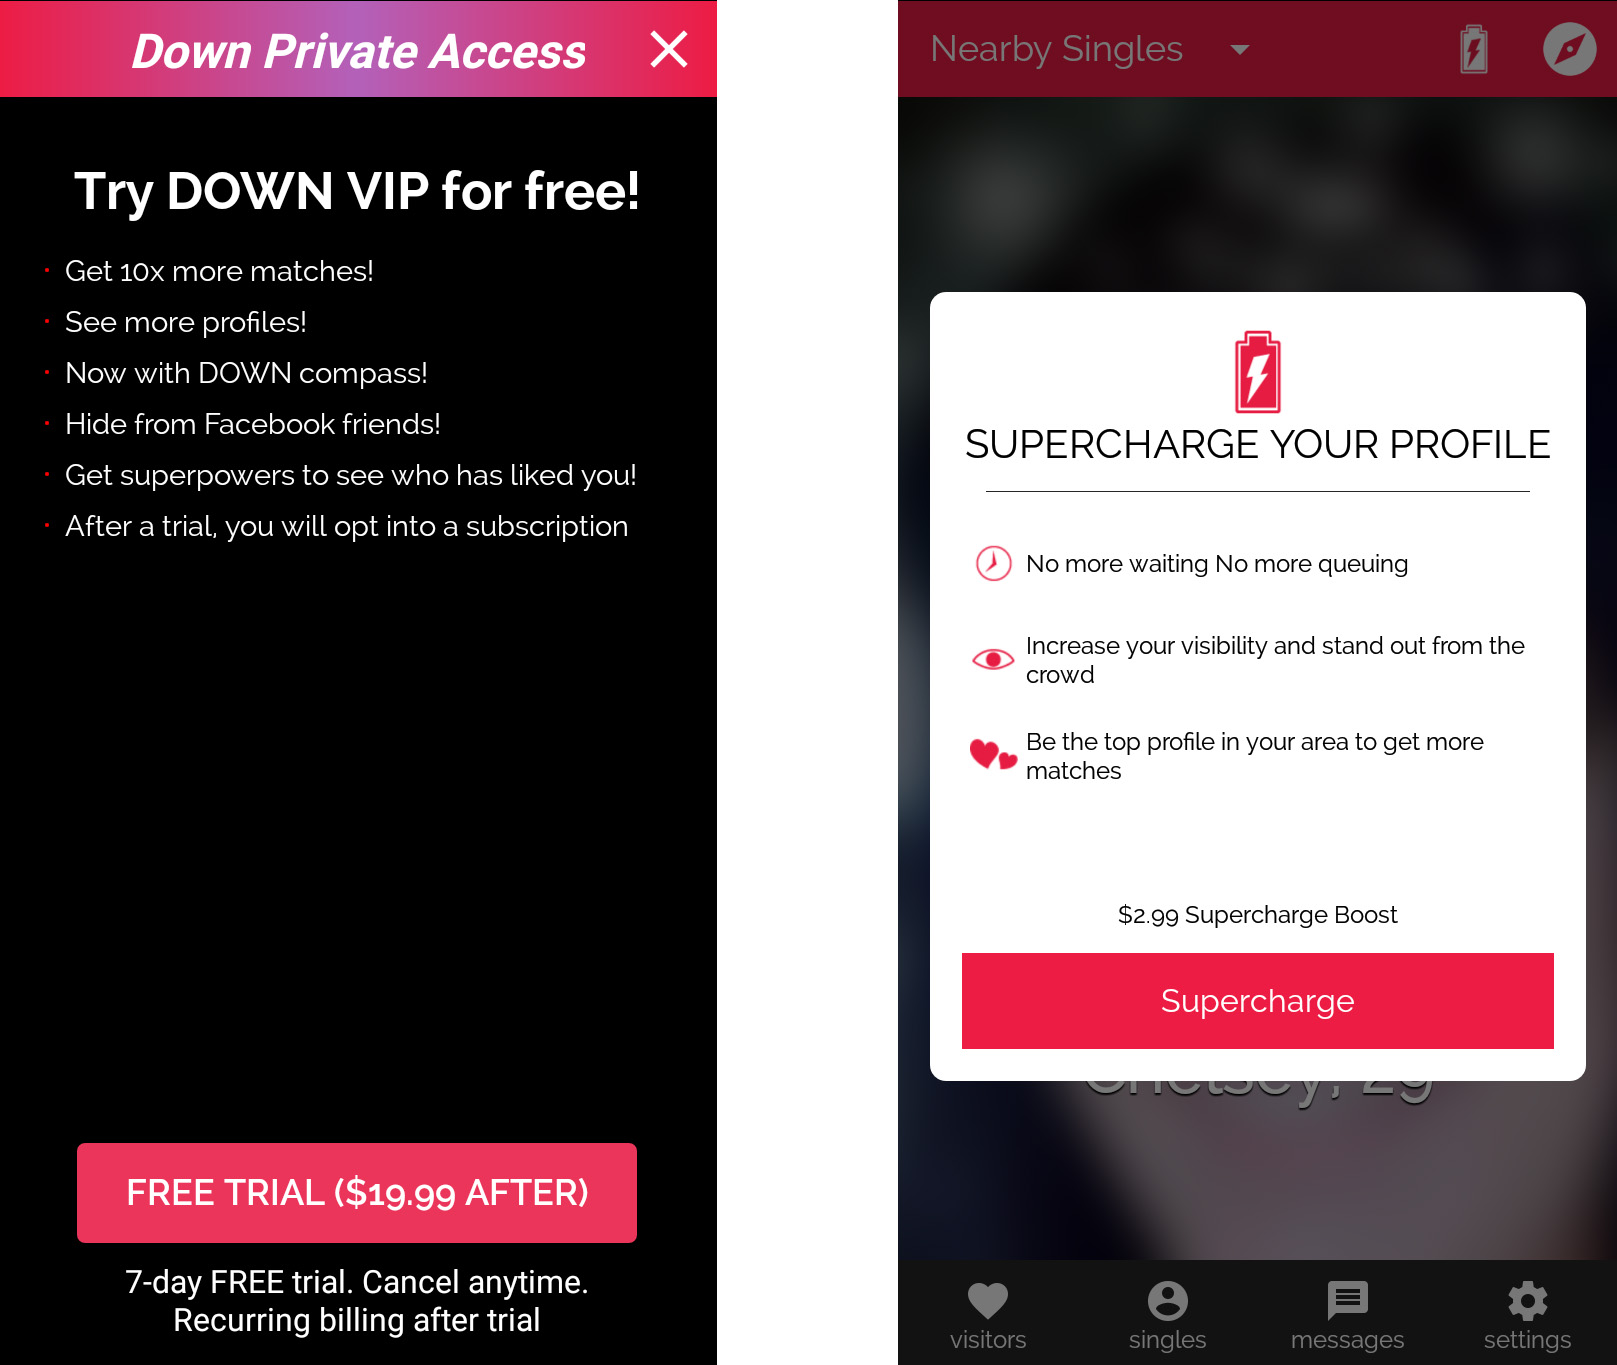 DOWN dating app Supercharge Your Profile